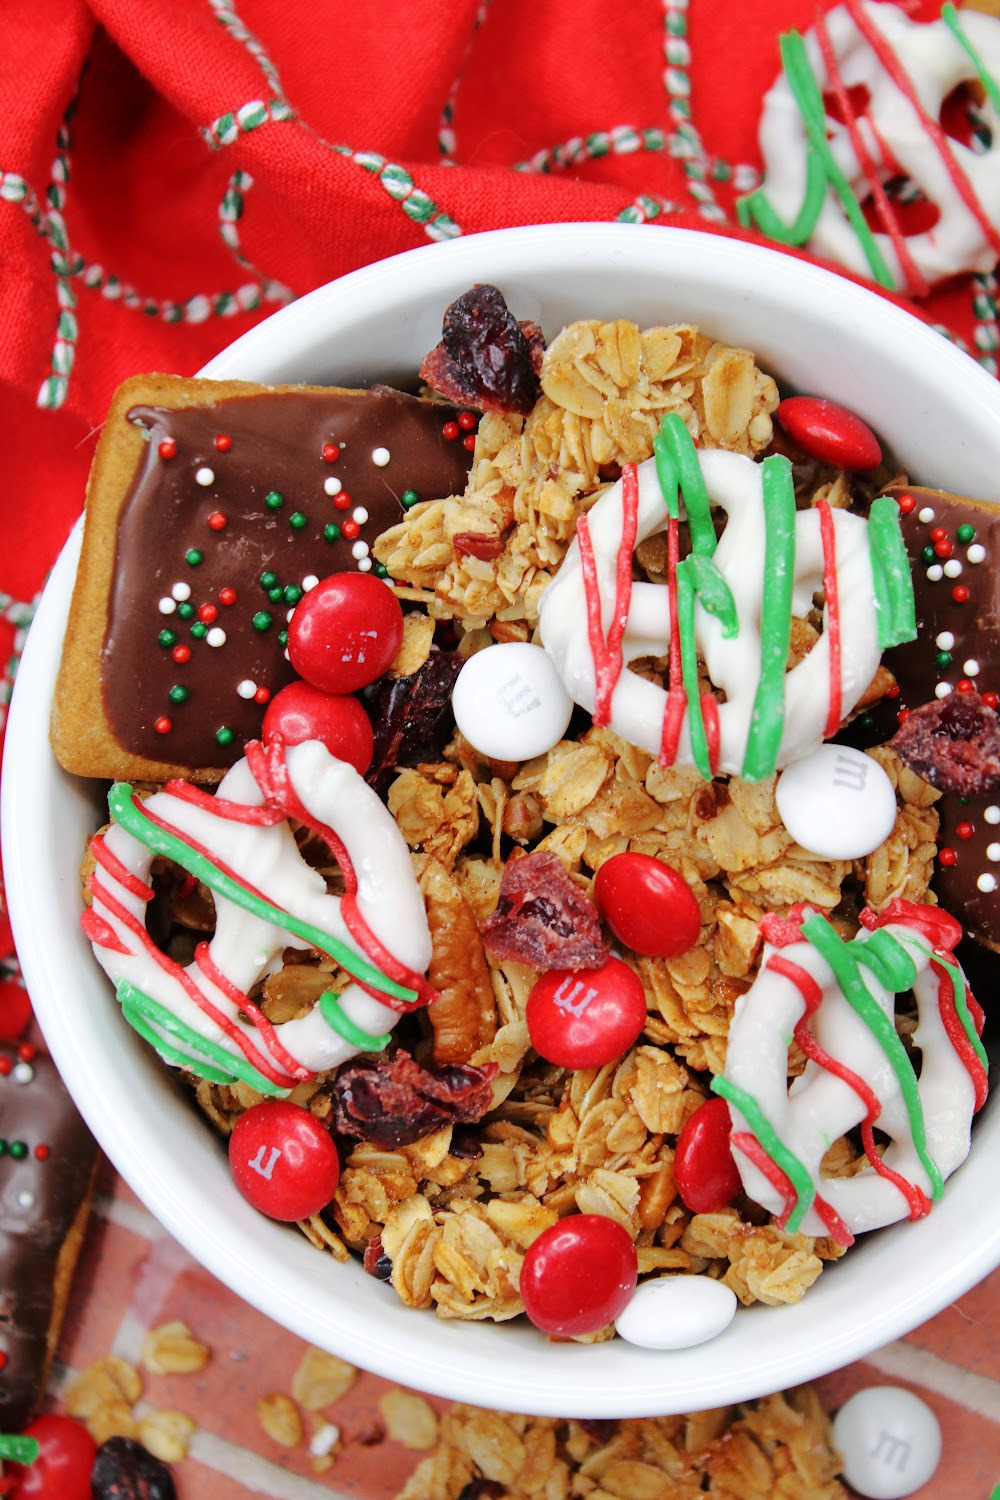 This reindeer chow includes gingerbread cookies, granola, M&Ms and white chocolate-covered pretzels. Served here in a white bowl with a festive red hand towel.